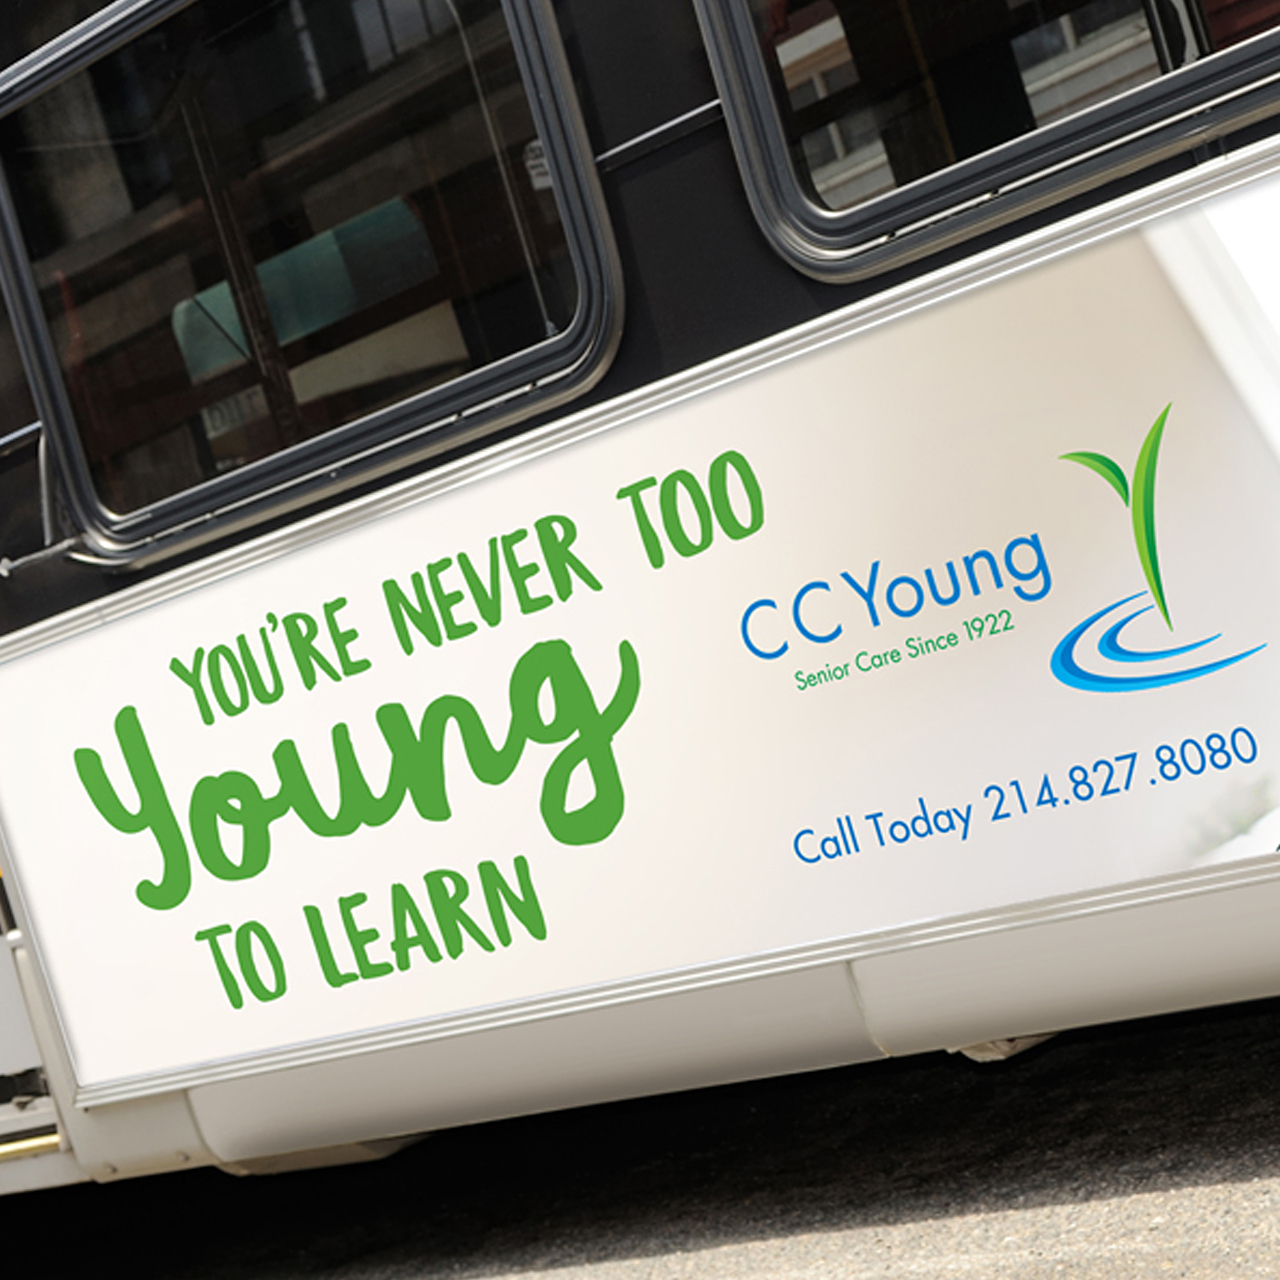 An image of a bus board ad for C. C. Young